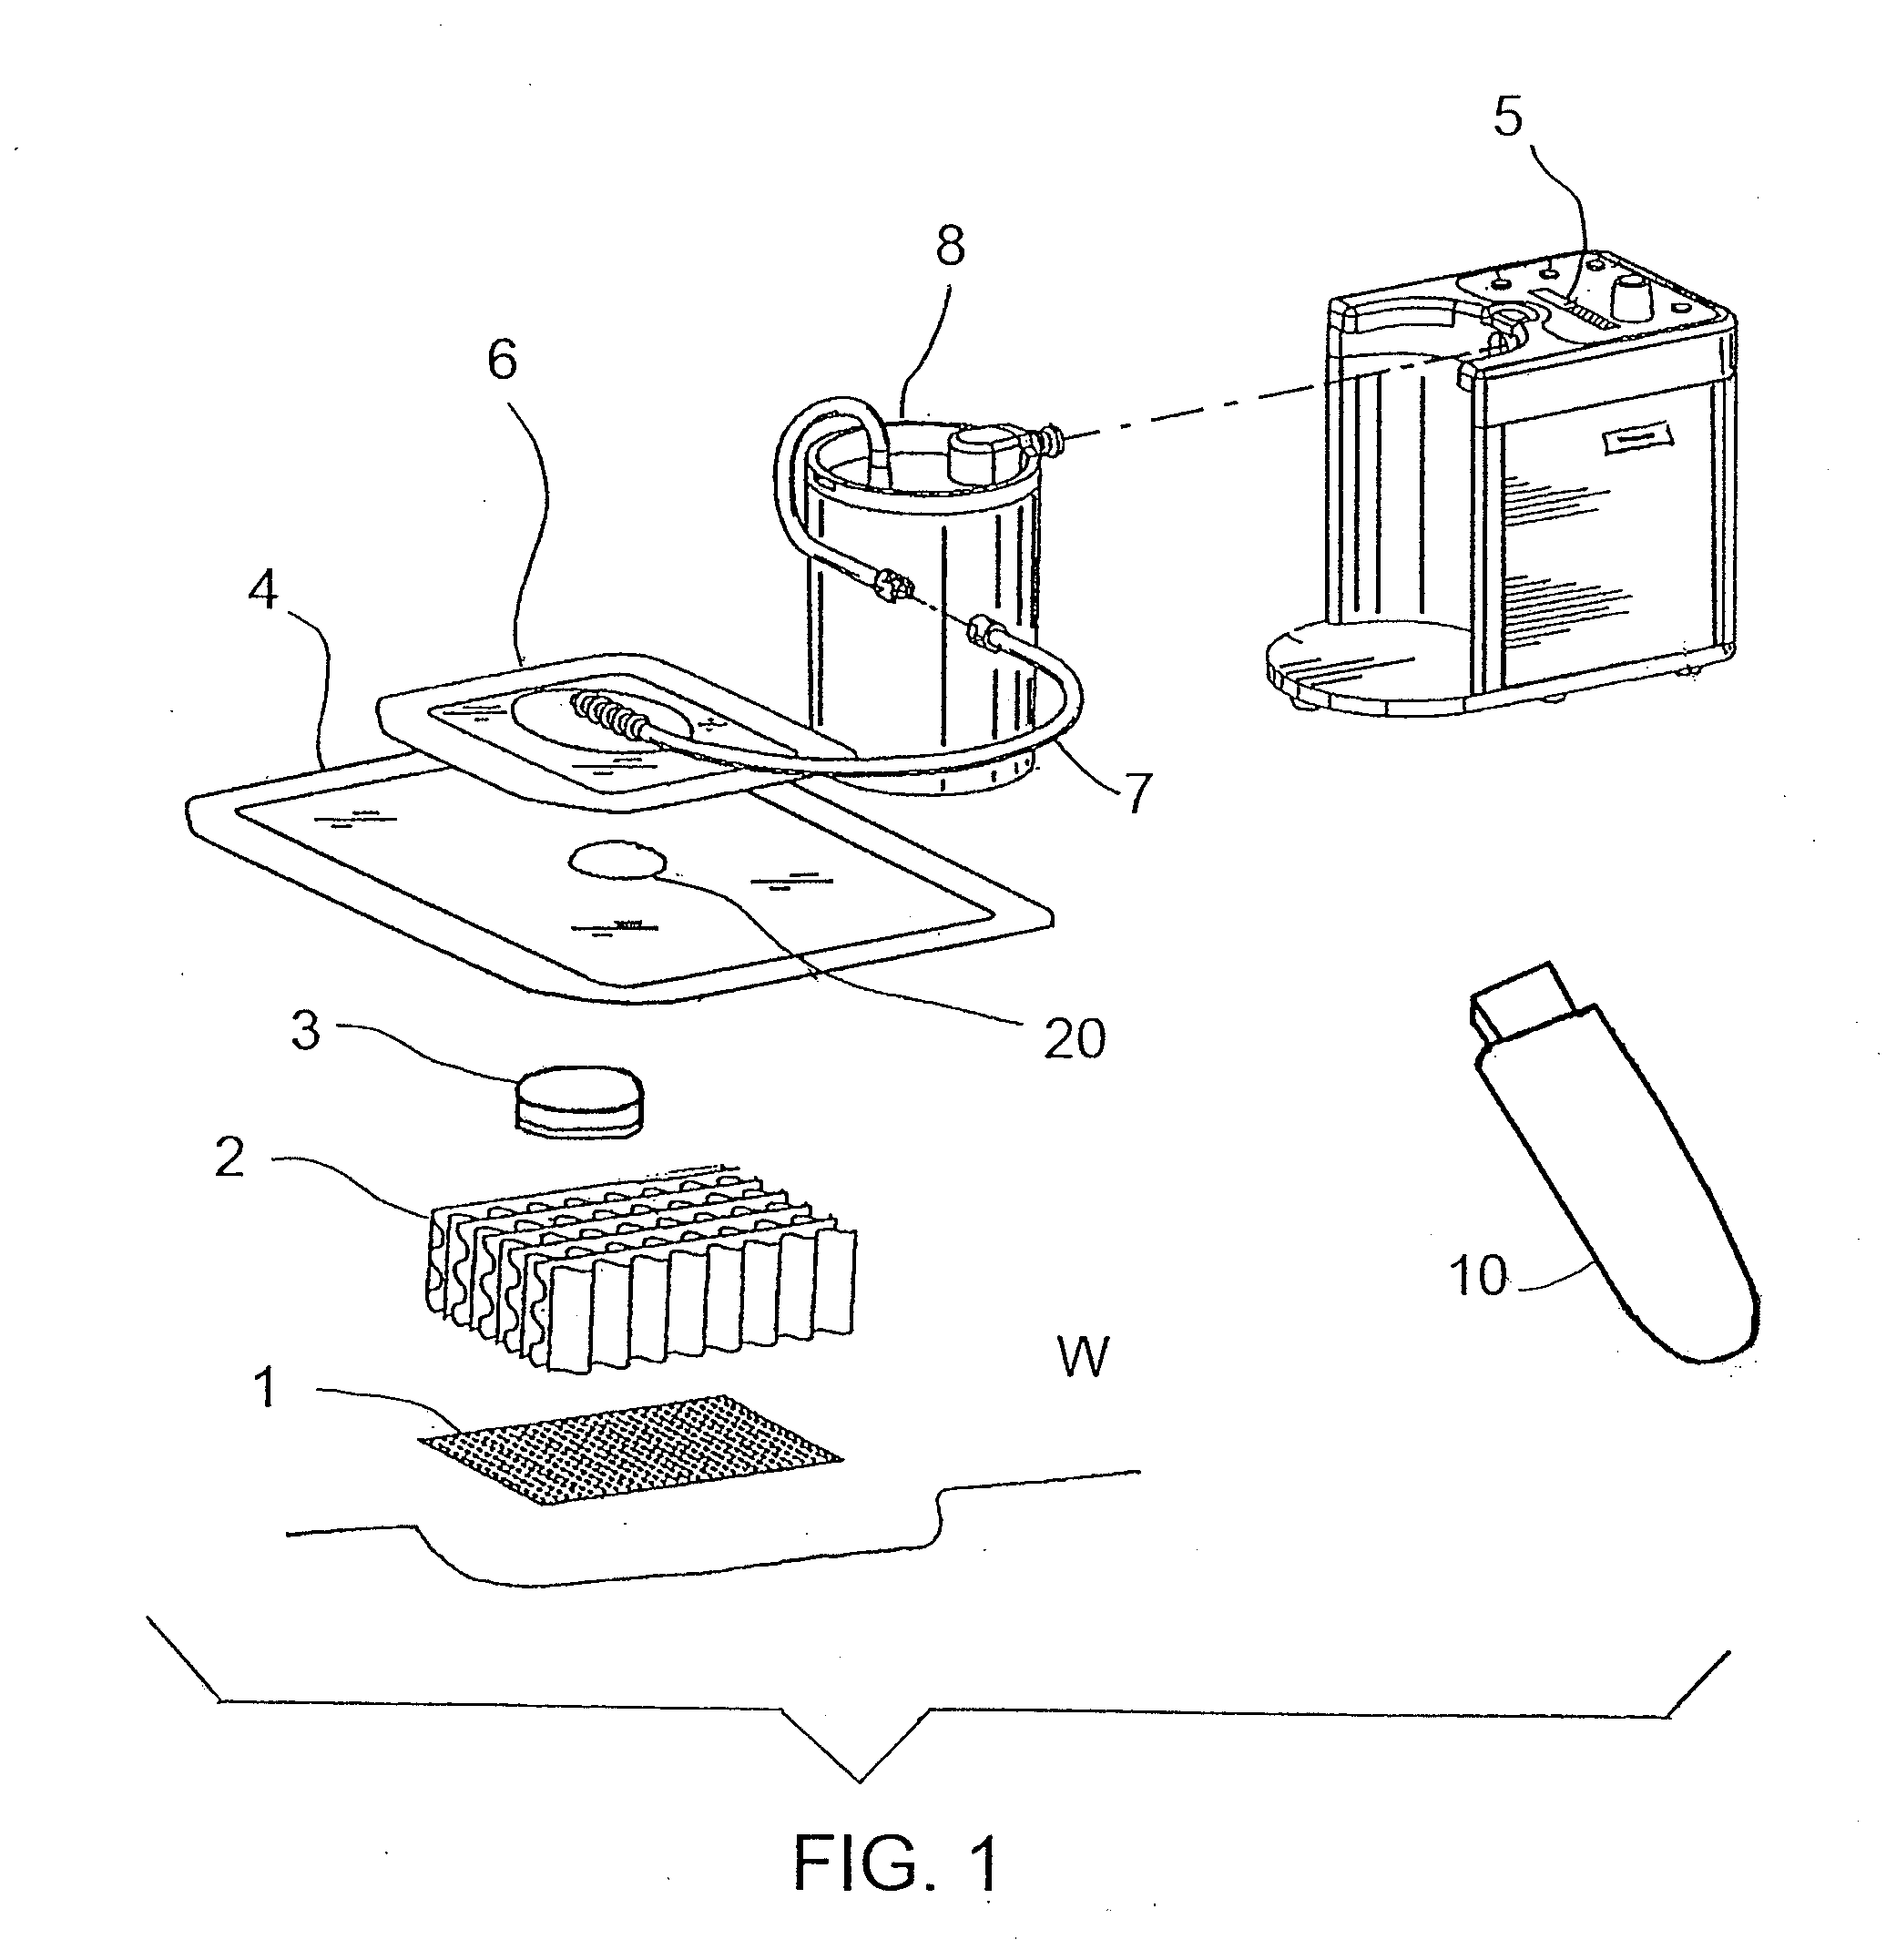 Pump system for negative pressure wound therapy and improvements thereon